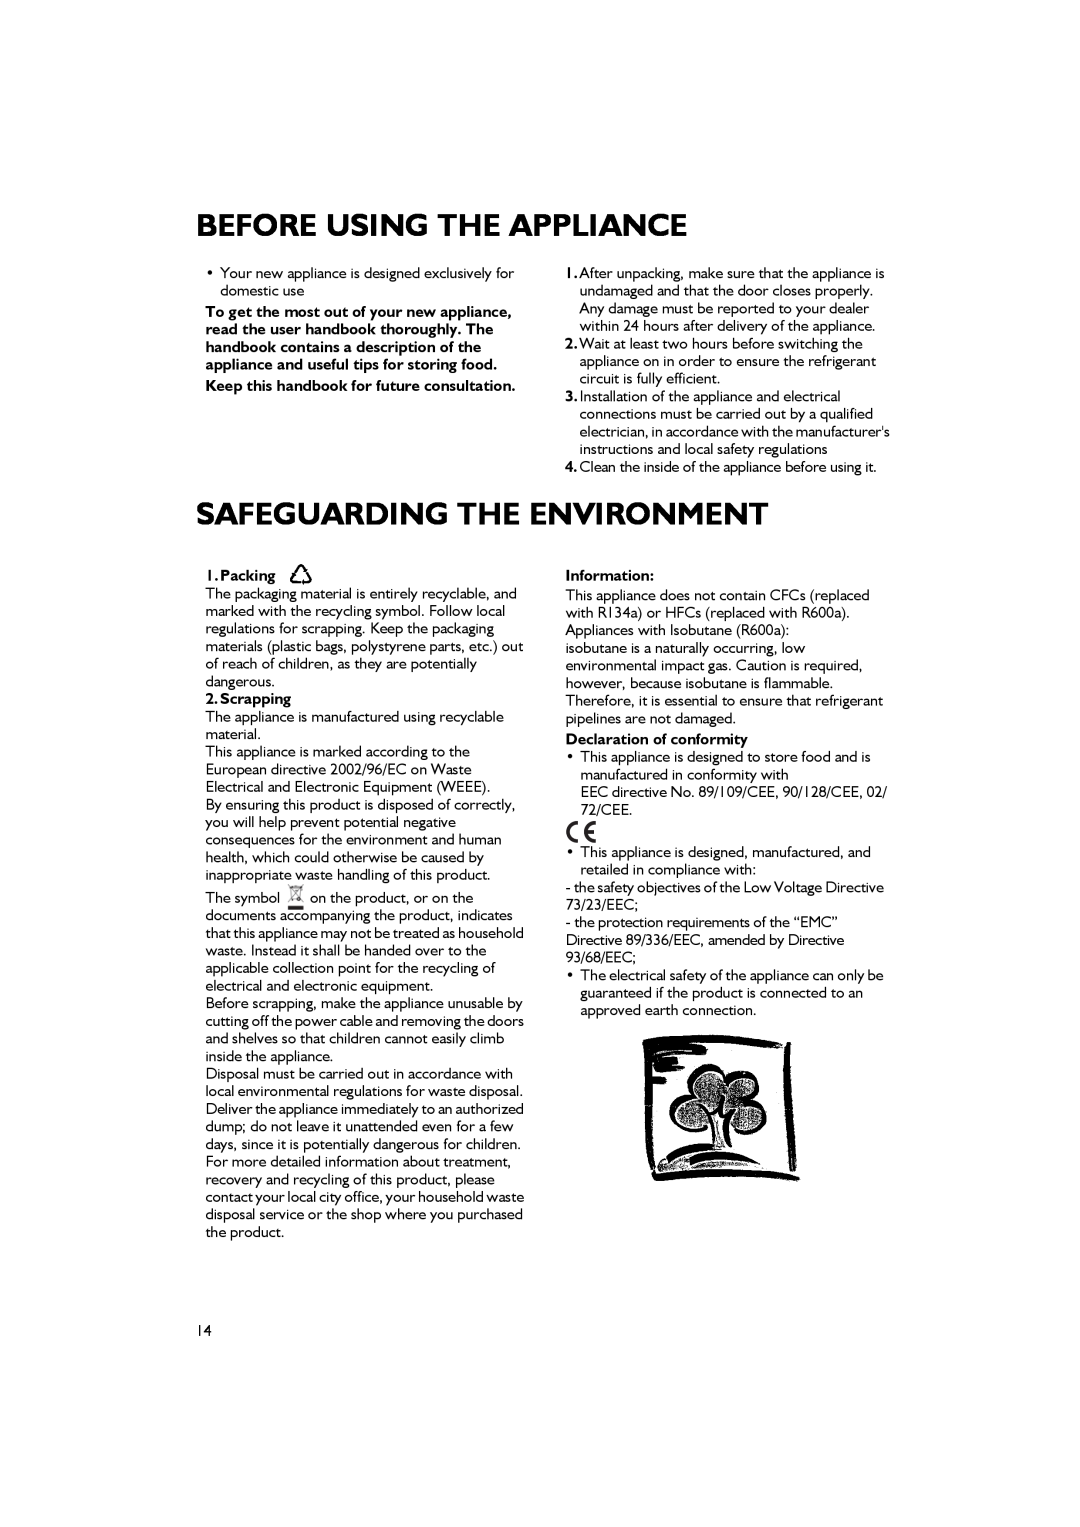 Smeg CR326AP7 manual Before Using The Appliance, Safeguarding The Environment, Keep this handbook for future consultation 